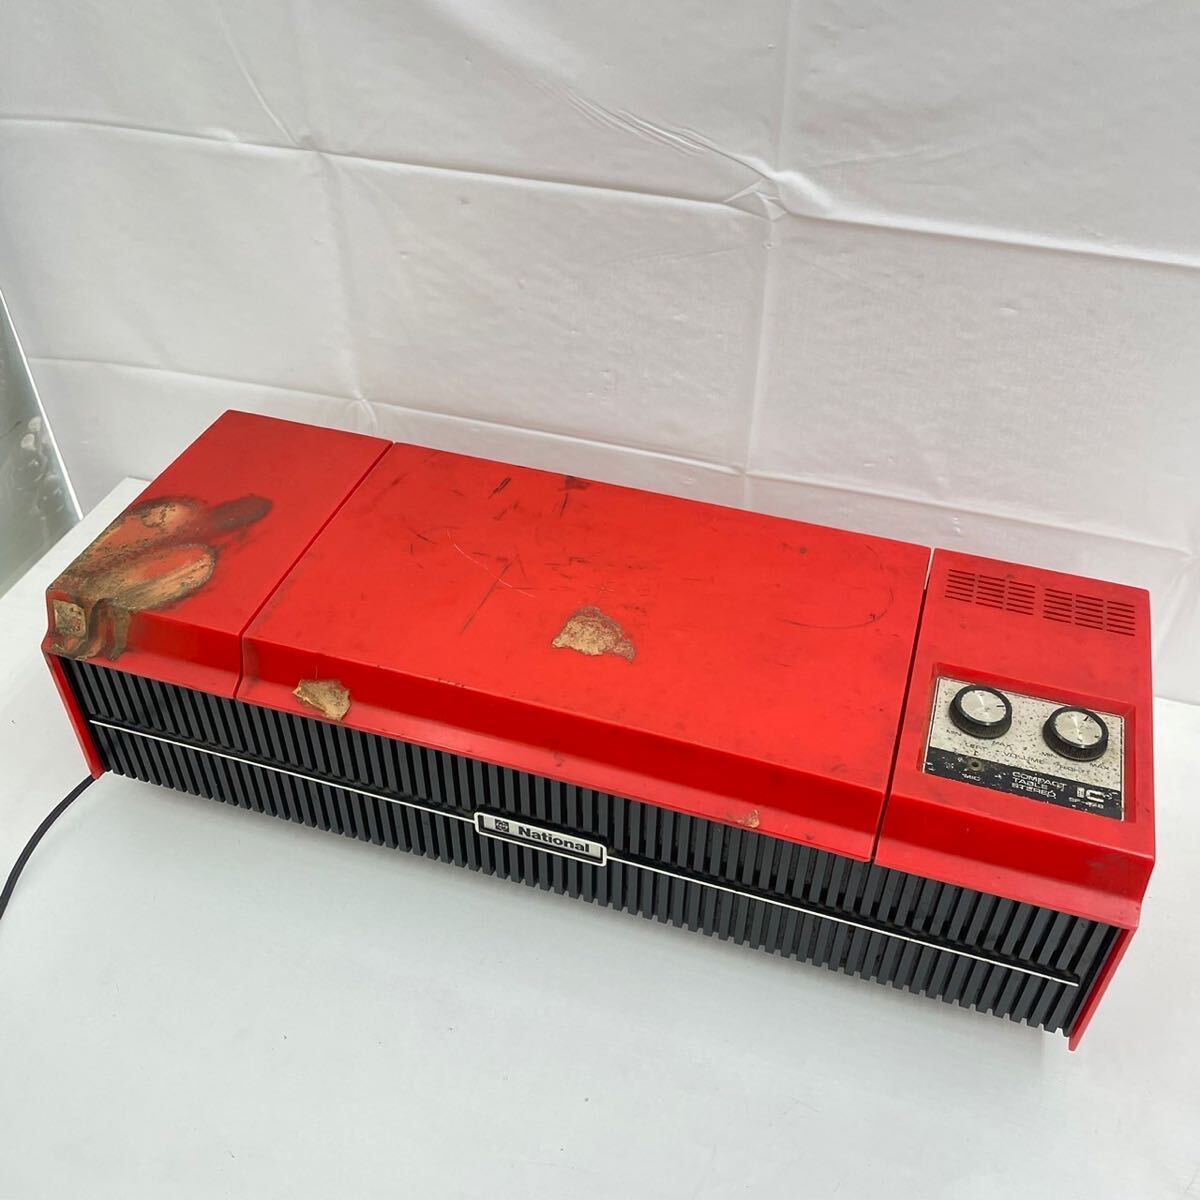 181*[ electrification verification settled ]National National compact record player SF-458 turntable red audio equipment Showa Retro *